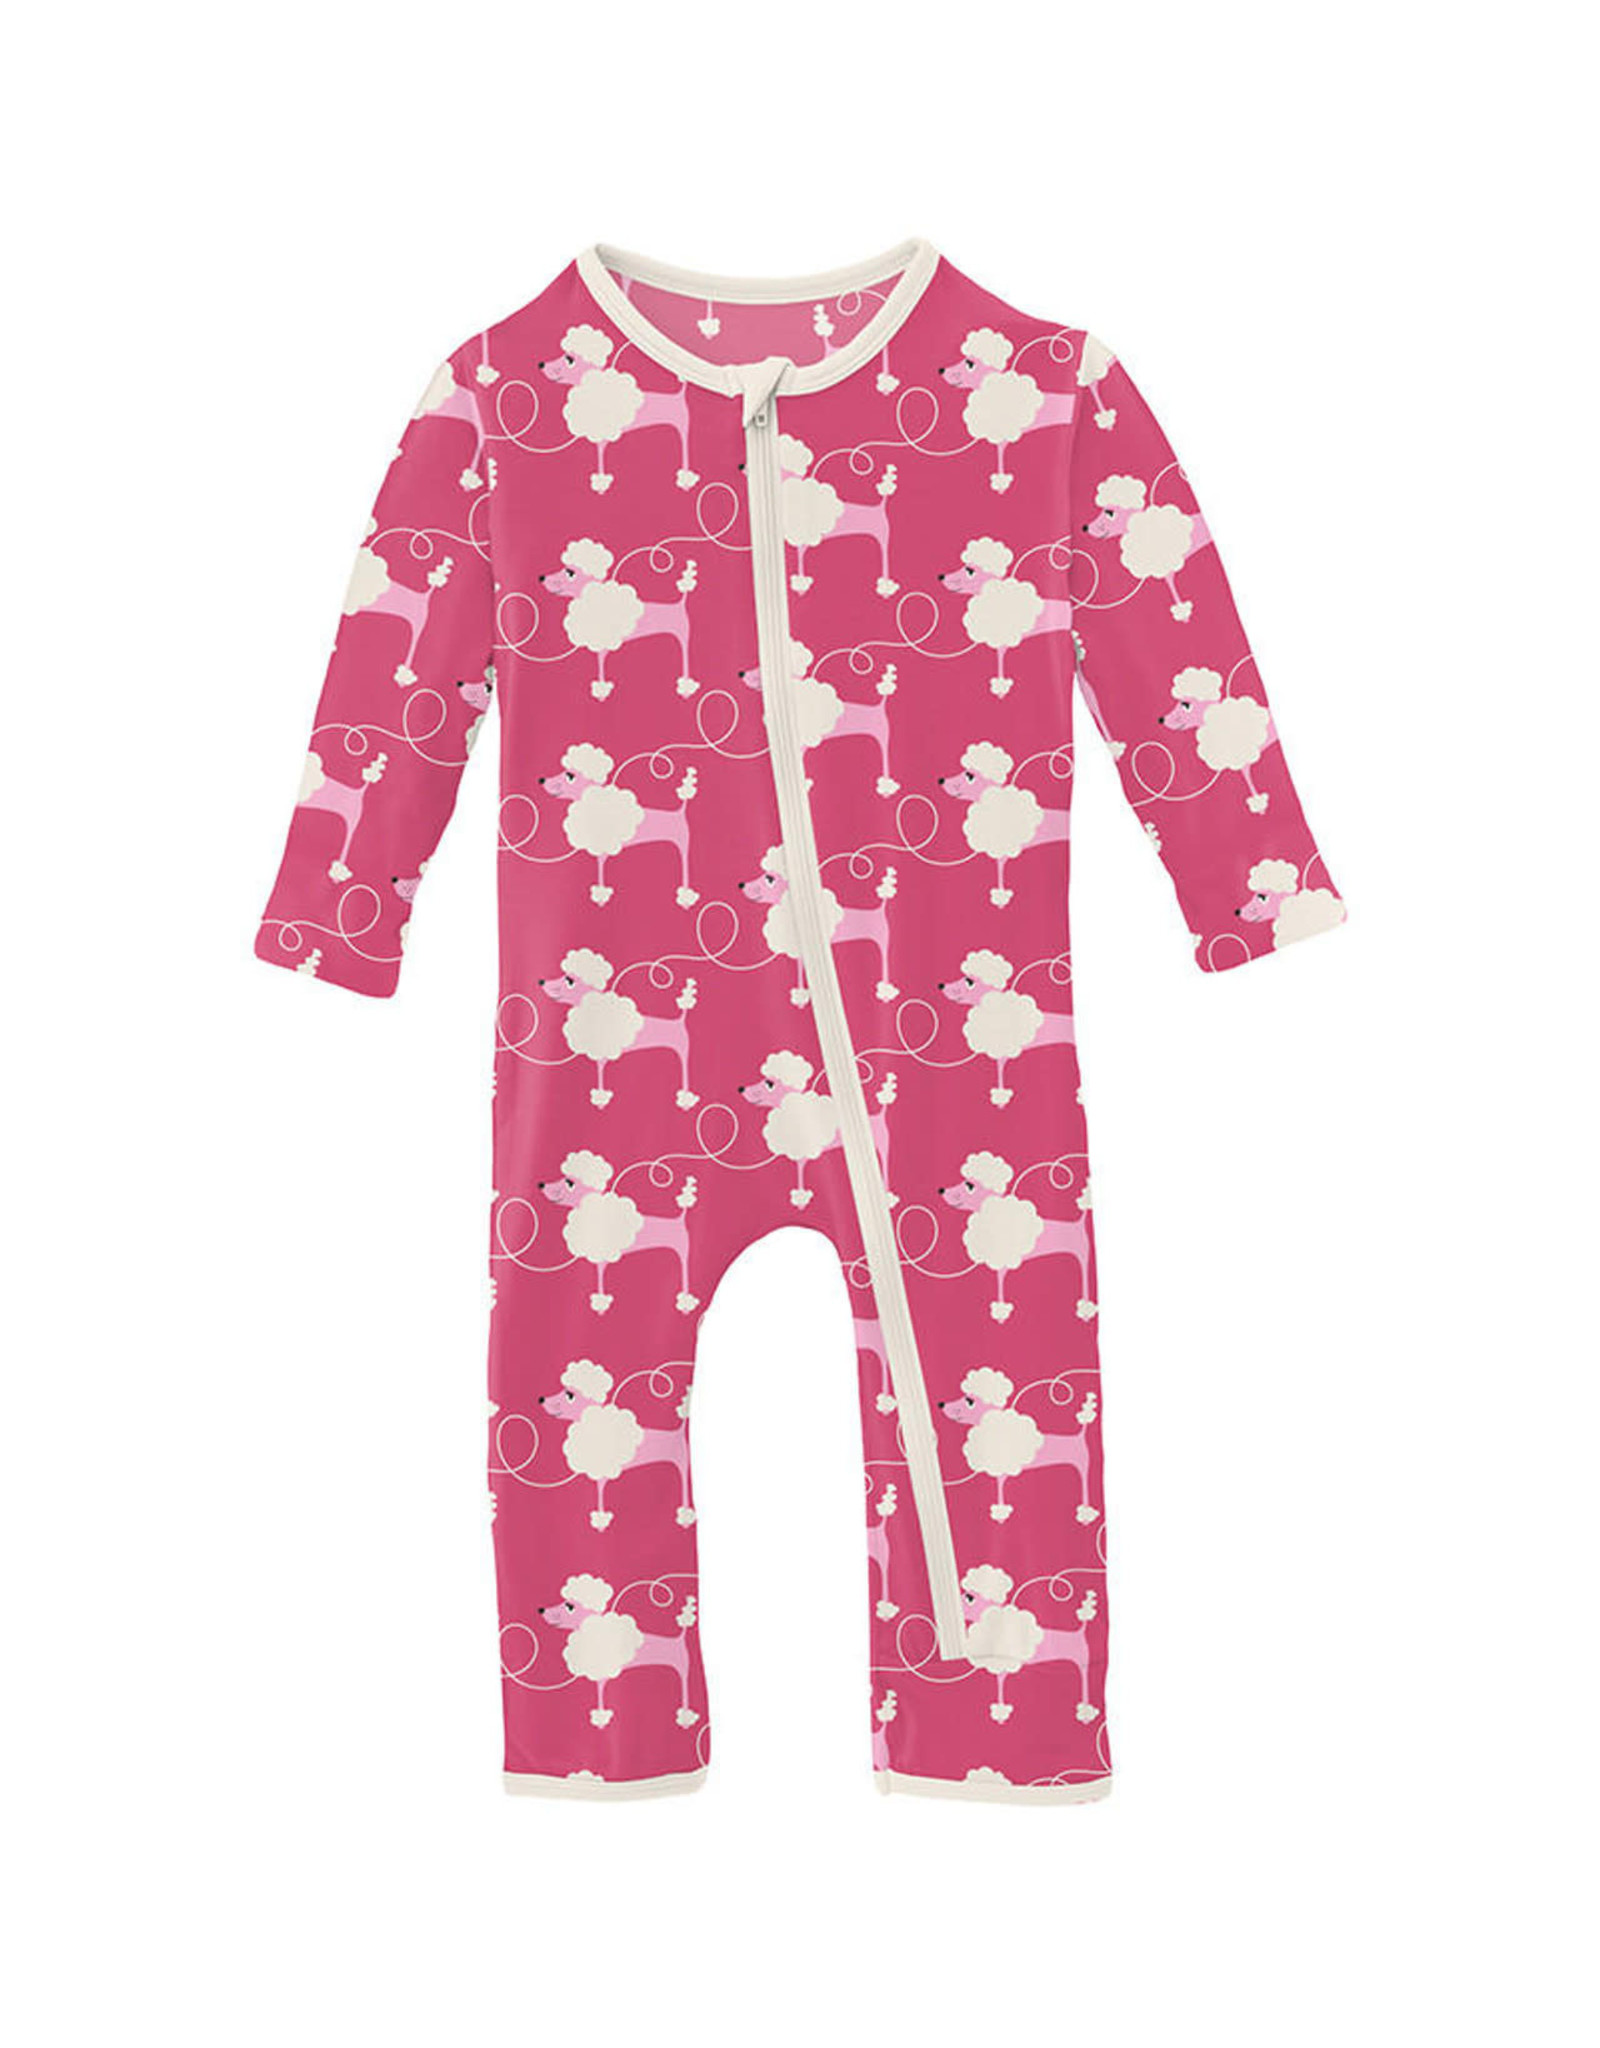 Kickee  Pants Print Muffin Ruffle Coverall with Zipper (Flamingo Poodles)